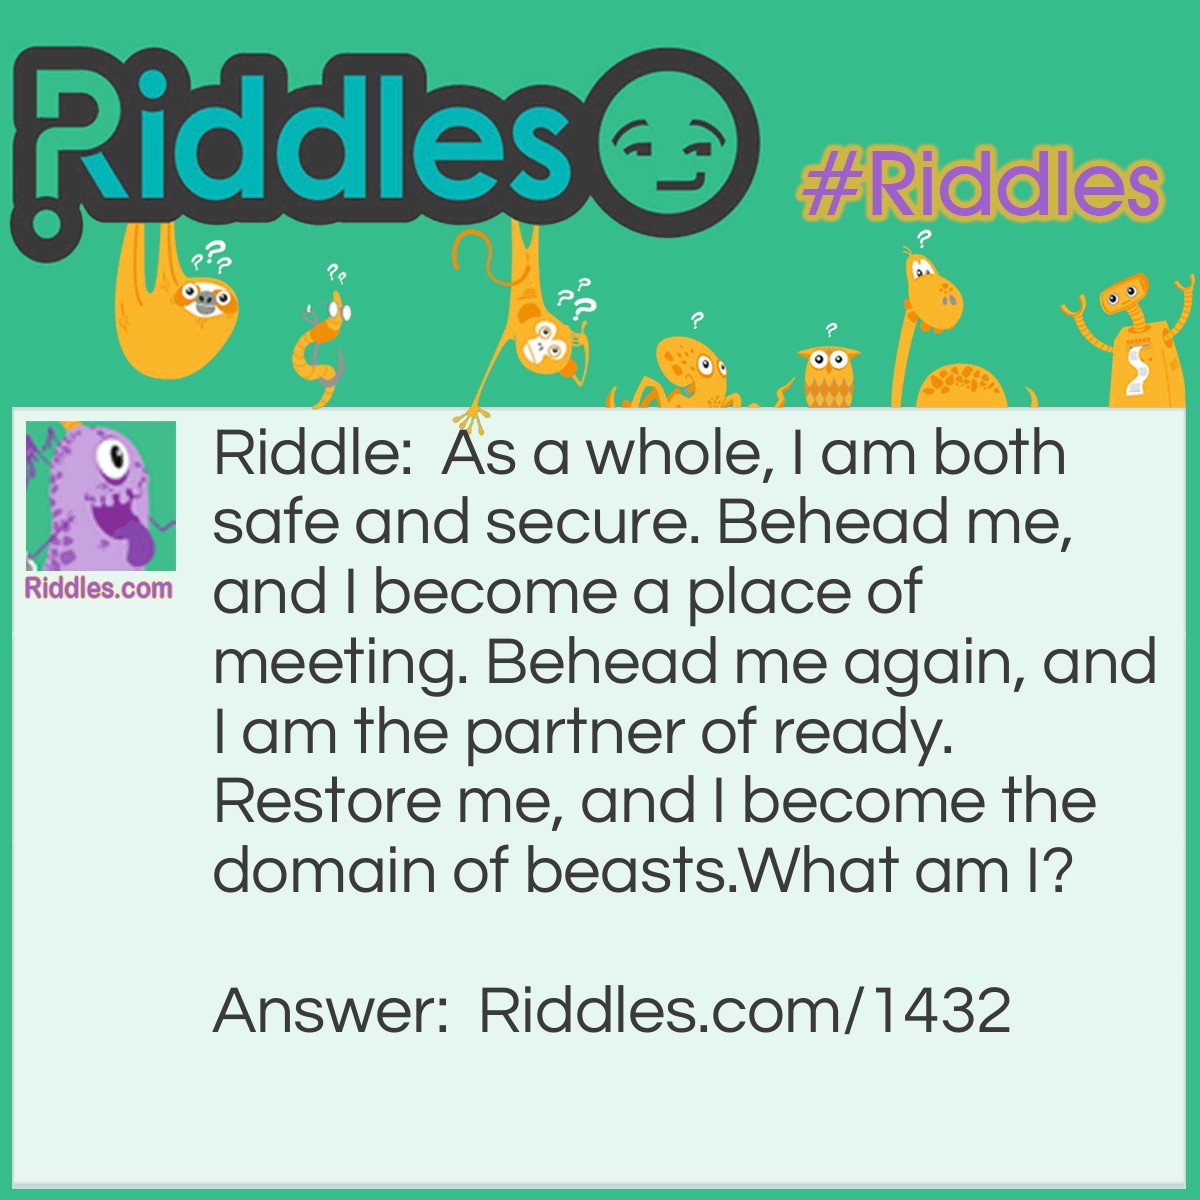 Riddle: As a whole, I am both safe and secure. Behead me, and I become a place of meeting. Behead me again, and I am the partner of ready. Restore me, and I become the domain of beasts.
What am I? Answer: A Stable